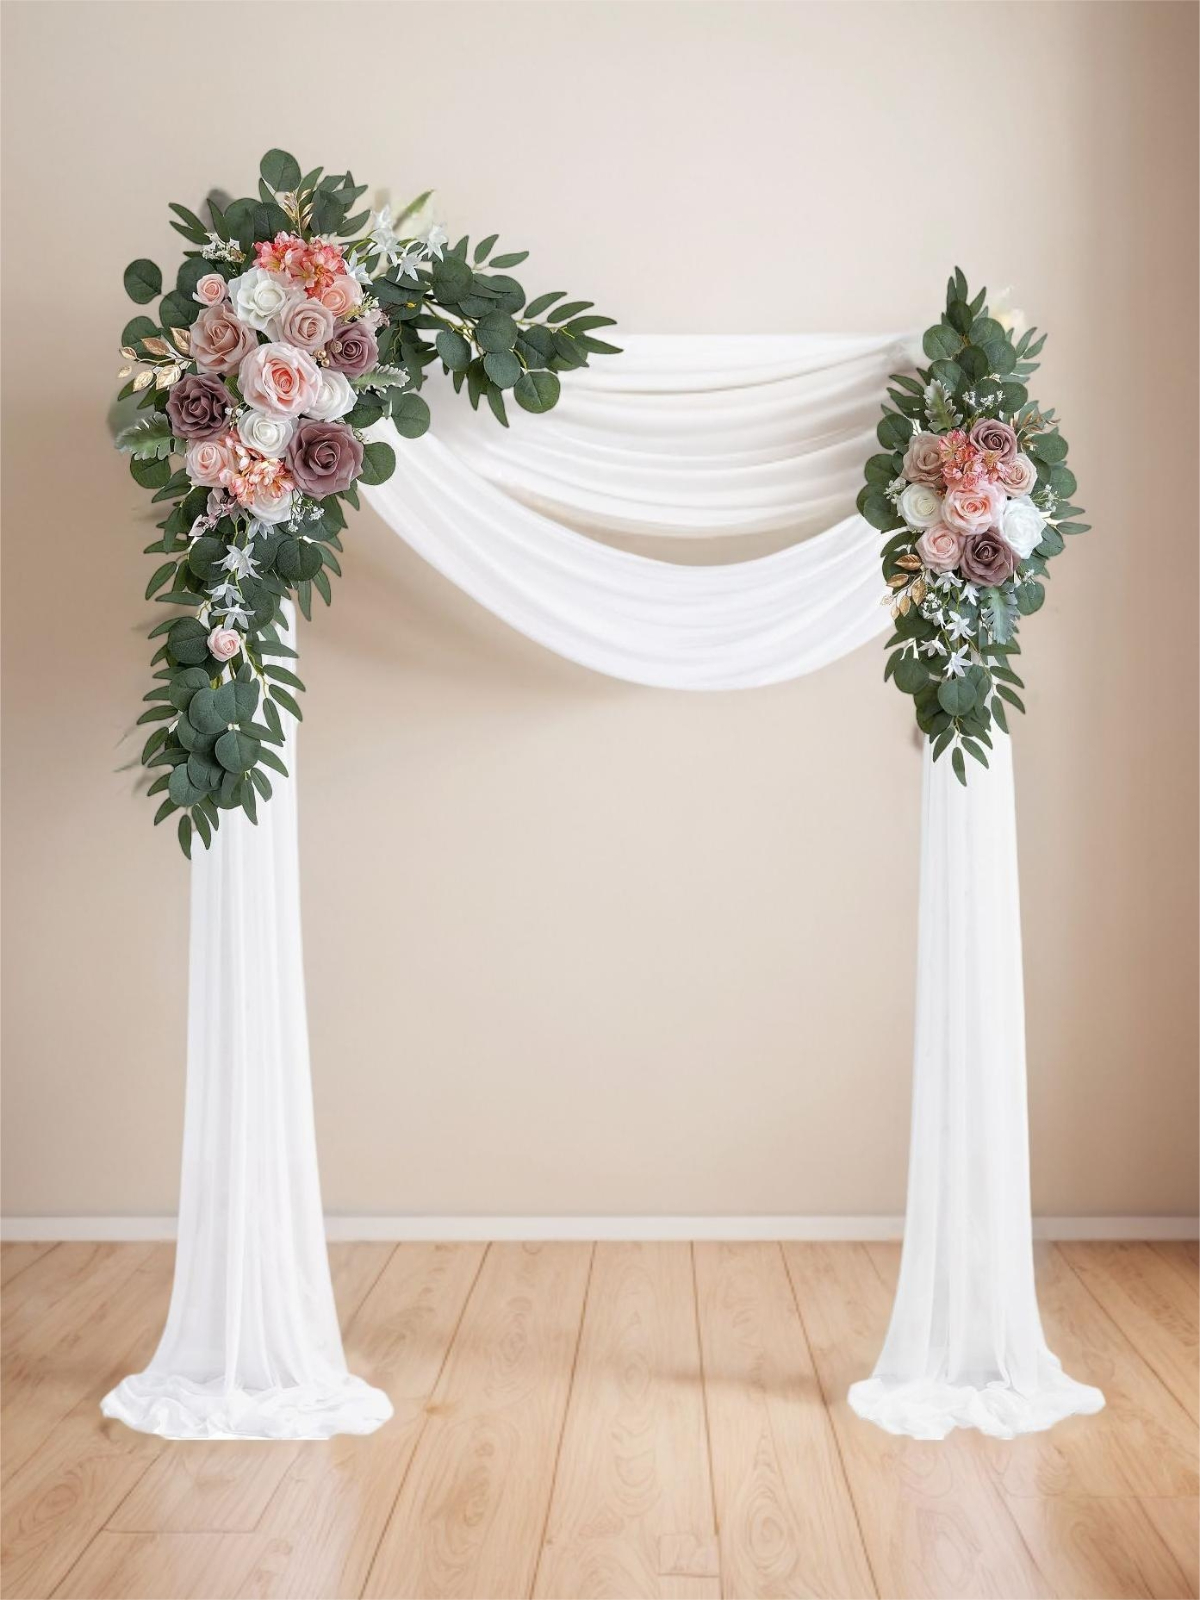 Dusty Rose Blush Wedding Artificial Arch Flowers Kit With Draping Fabric GM2010